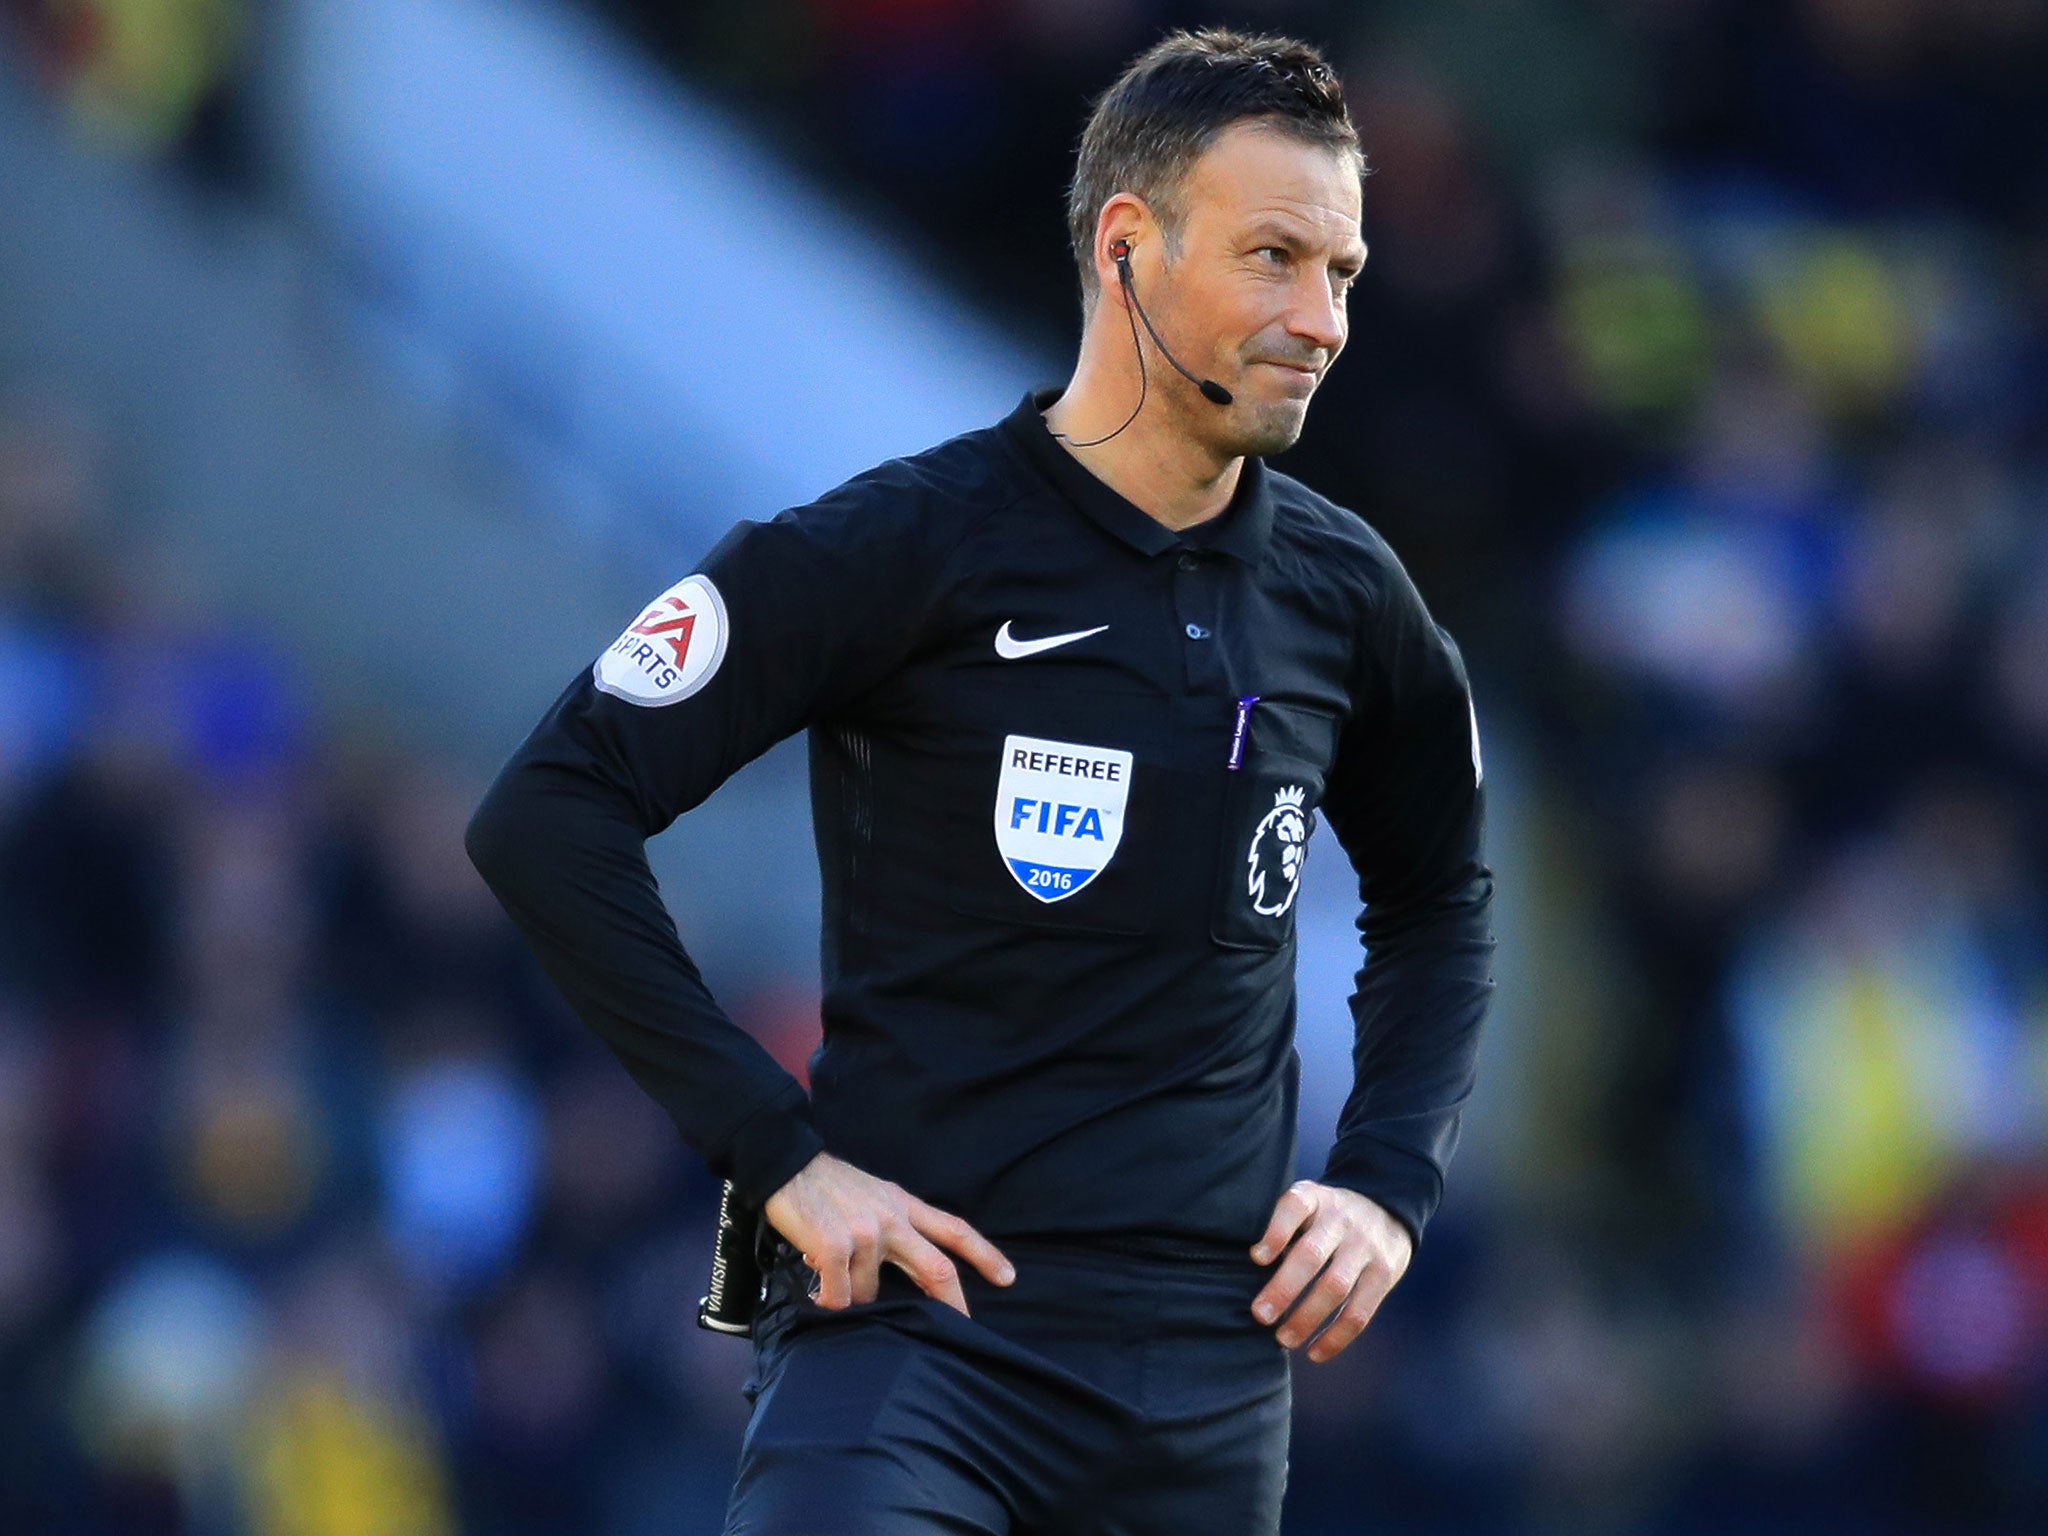 Mark Clattenburg admitted that he allowed his concern for perceptions over his own performance to influence the application of the rules